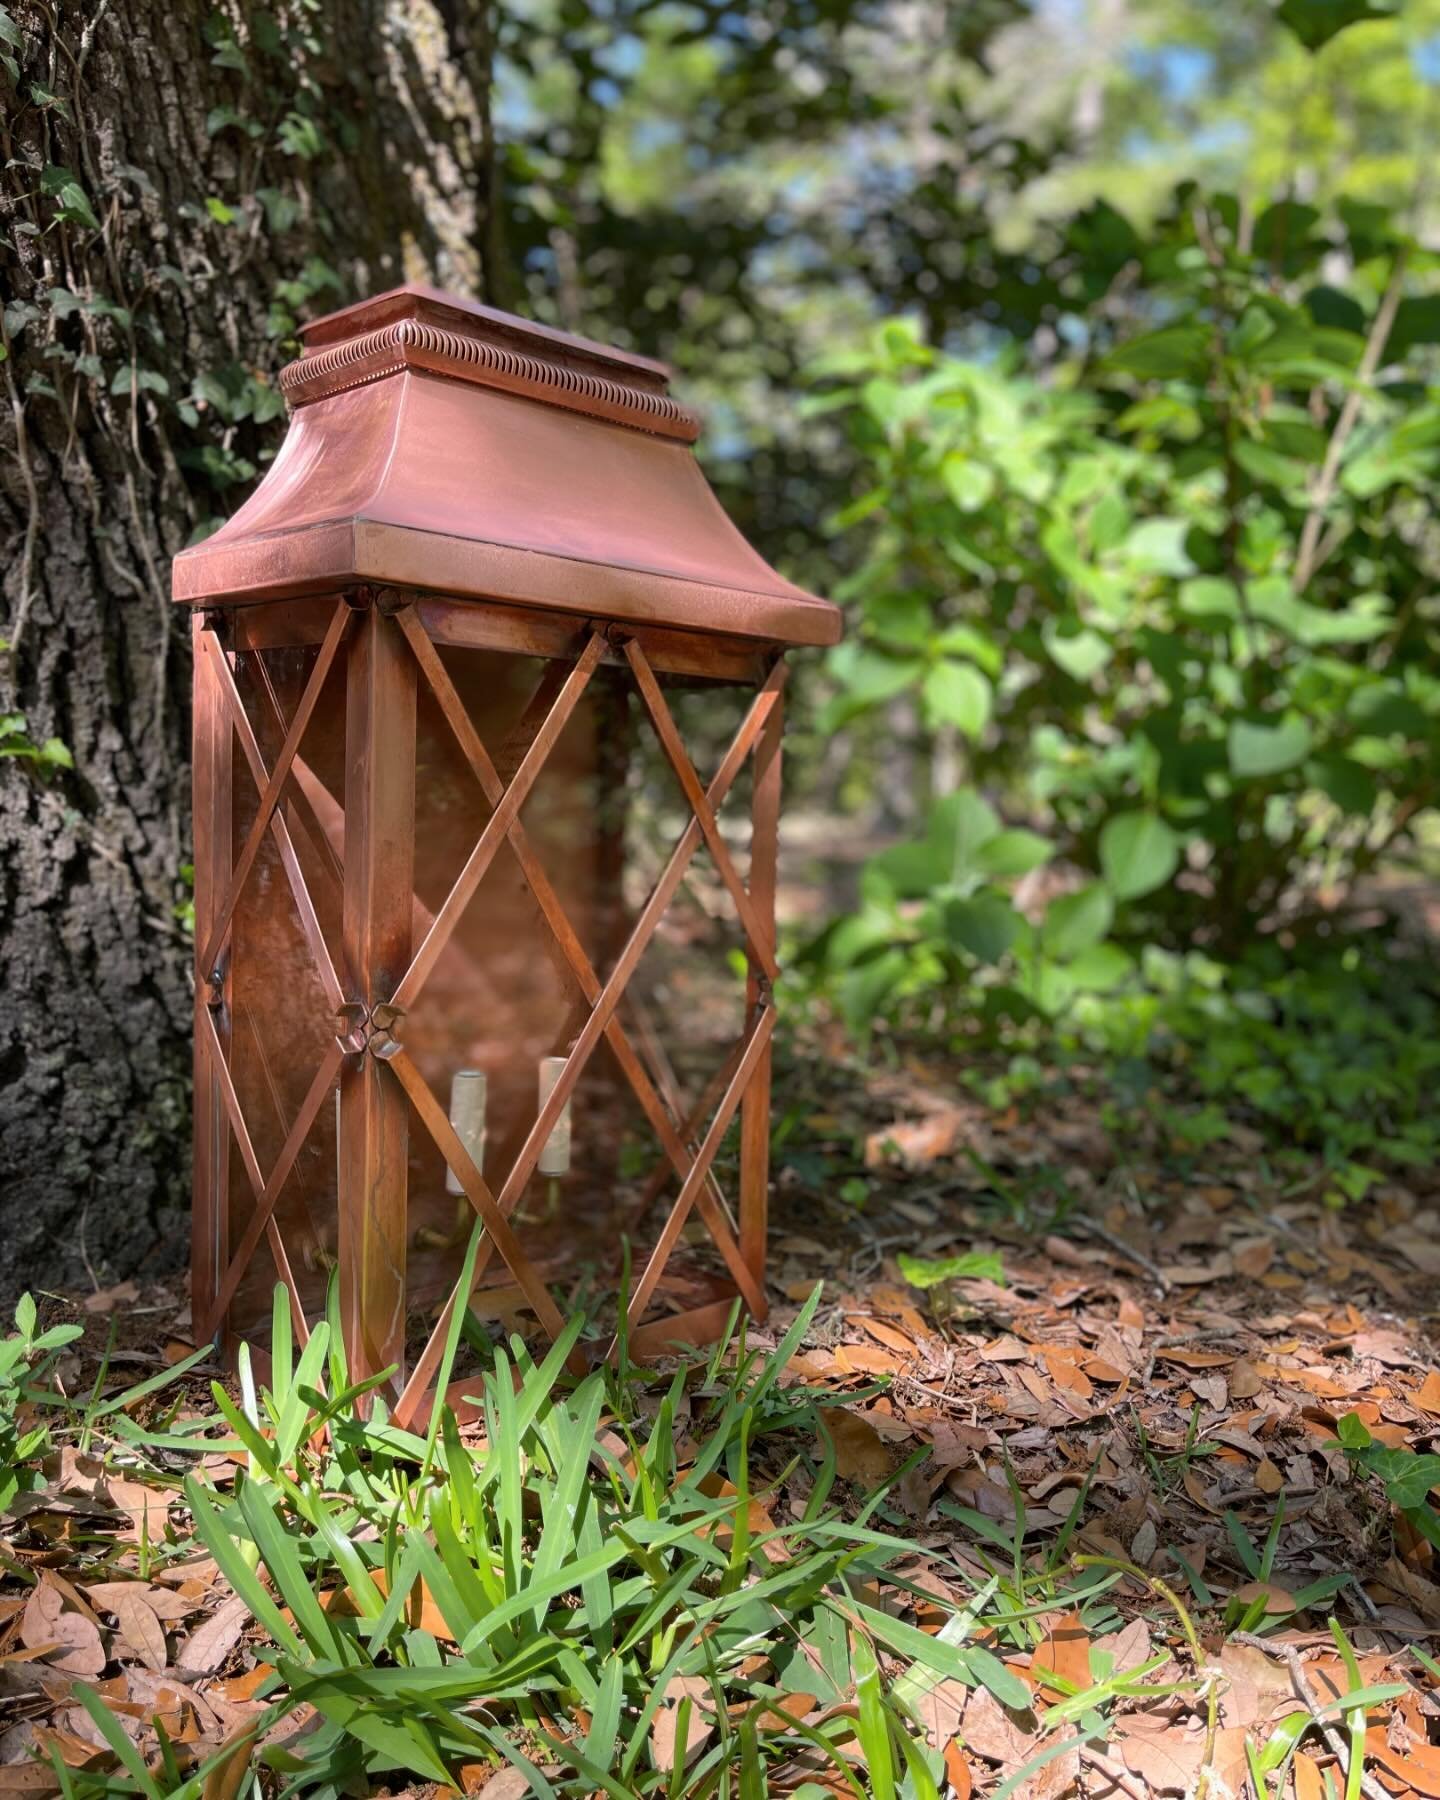 We had another opportunity to recreate a John Gantt original, and we&rsquo;re so grateful! An effort is in the works to preserve these treasures of Charleston craftsmanship, even reaching beyond our city. This gate lantern was made for Wachesaw Plant